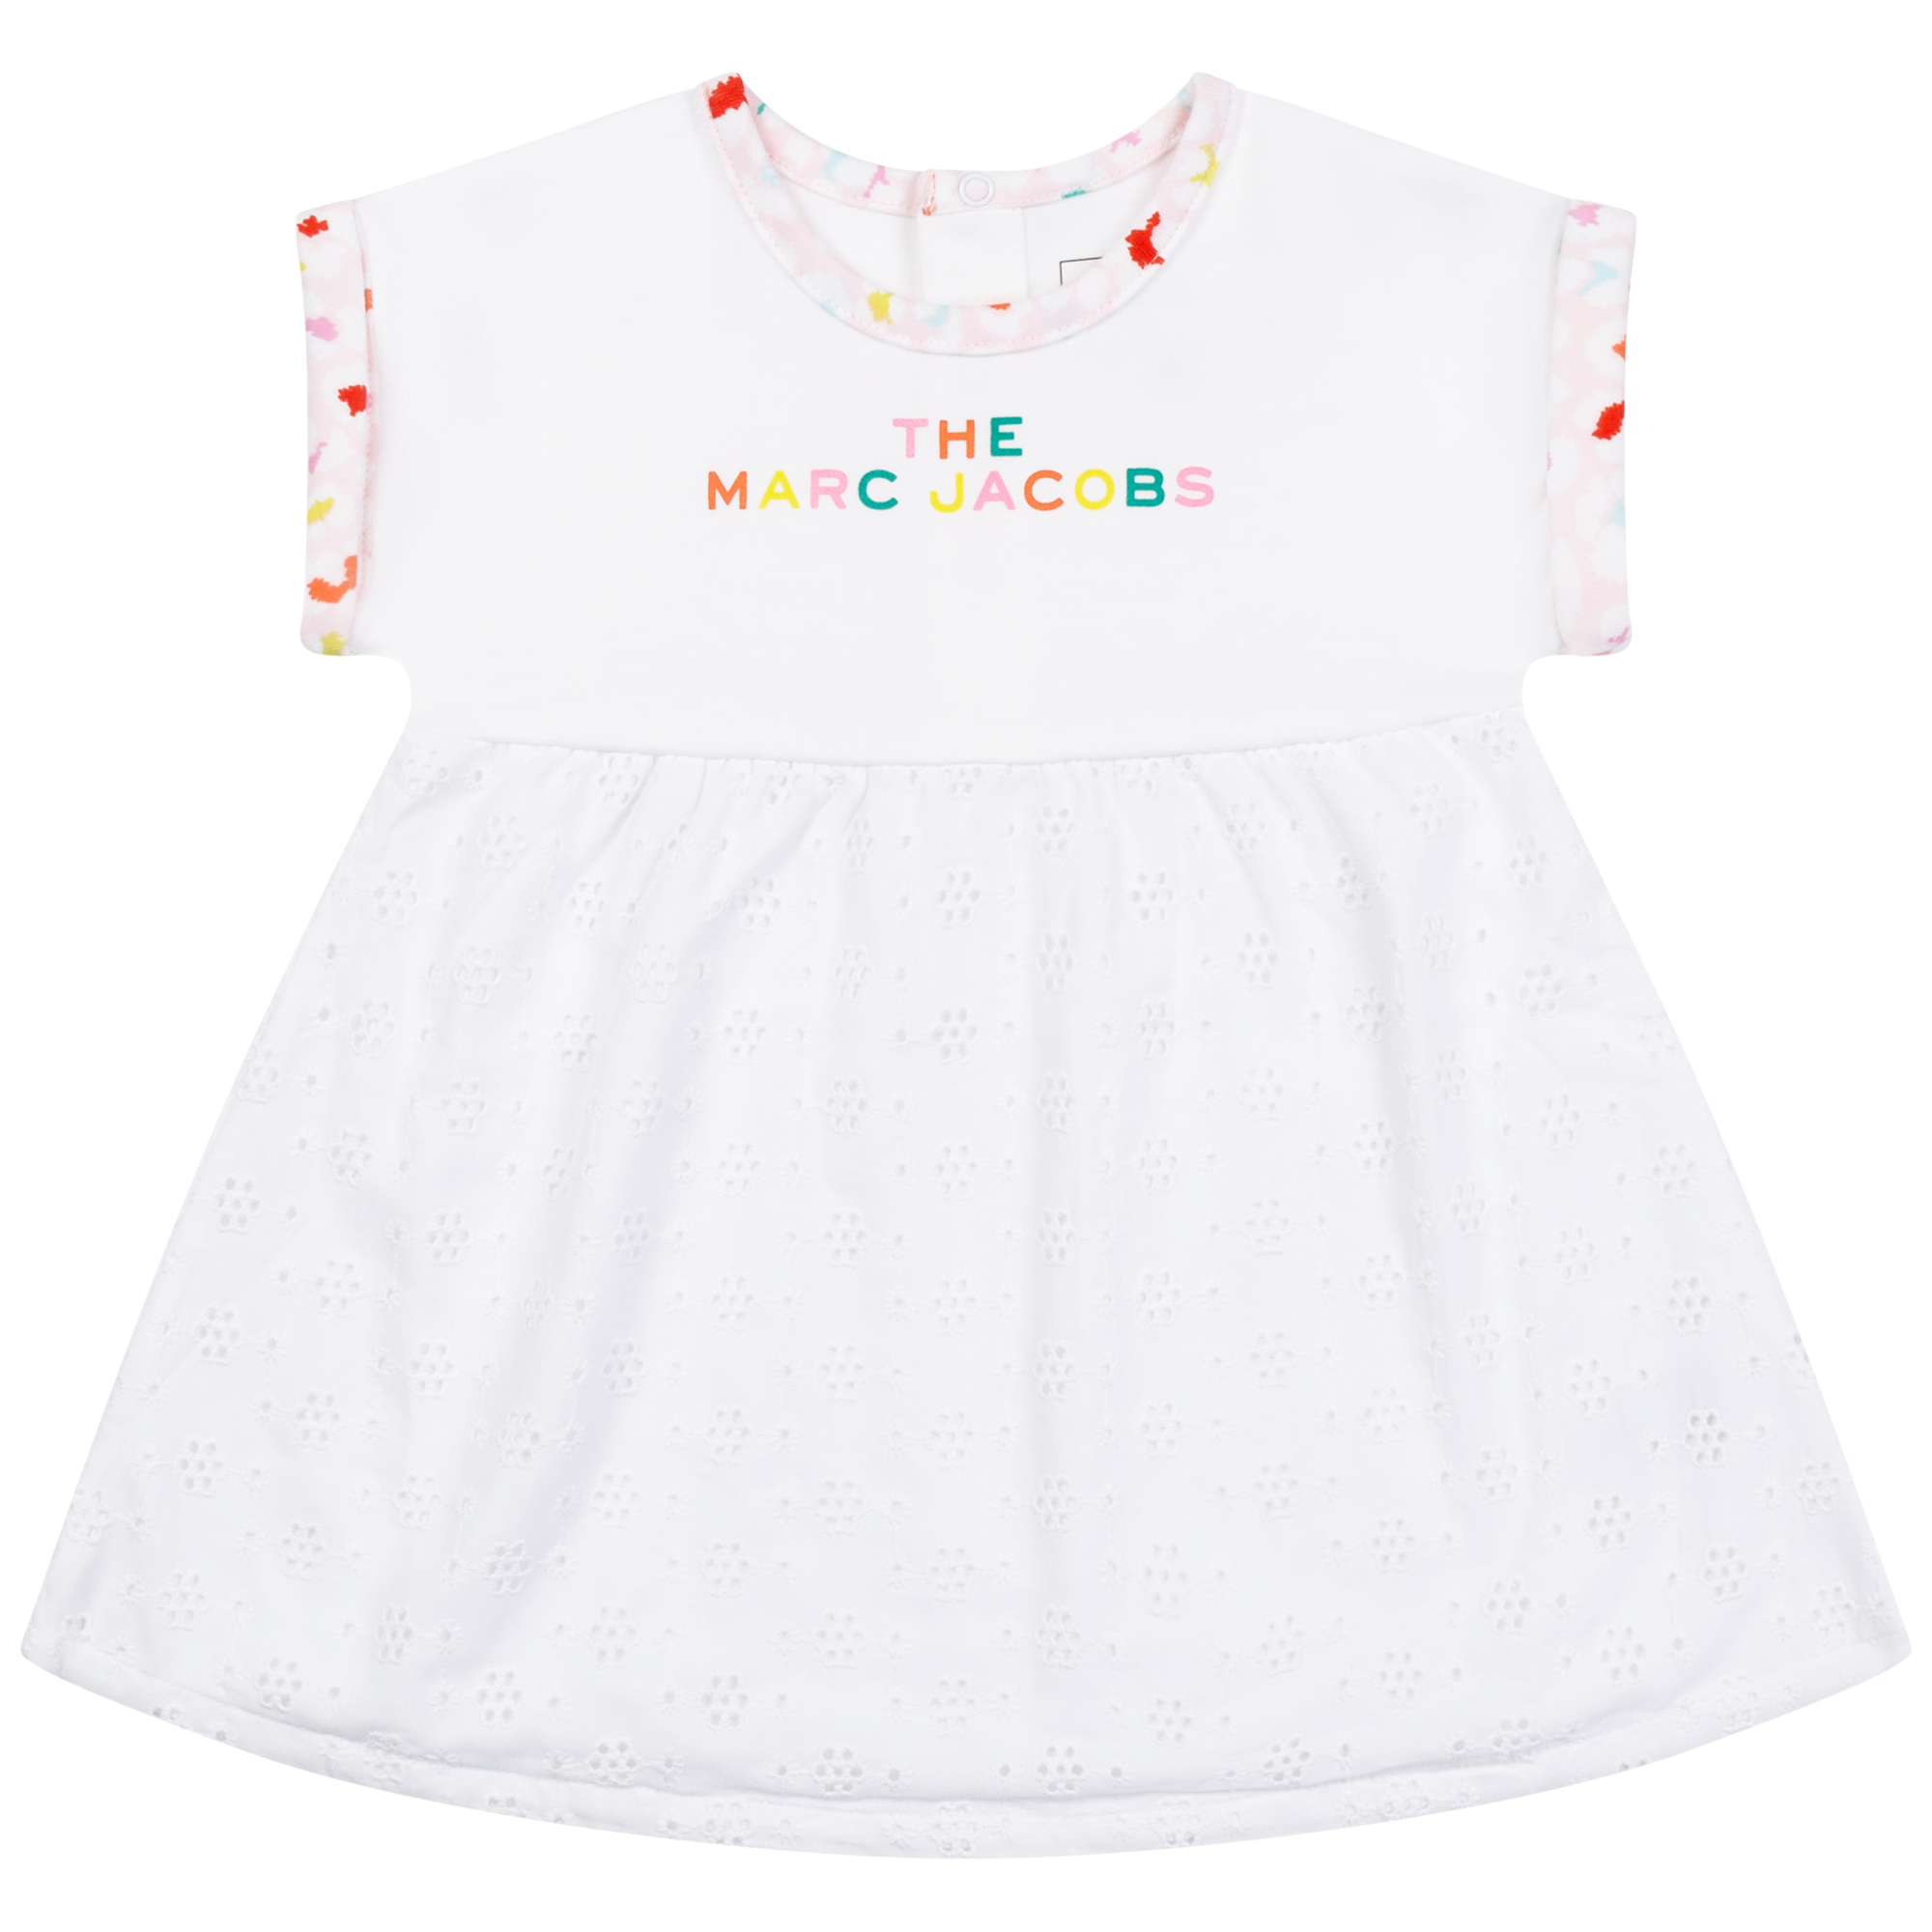 Dress and bloomers set MARC JACOBS for UNISEX